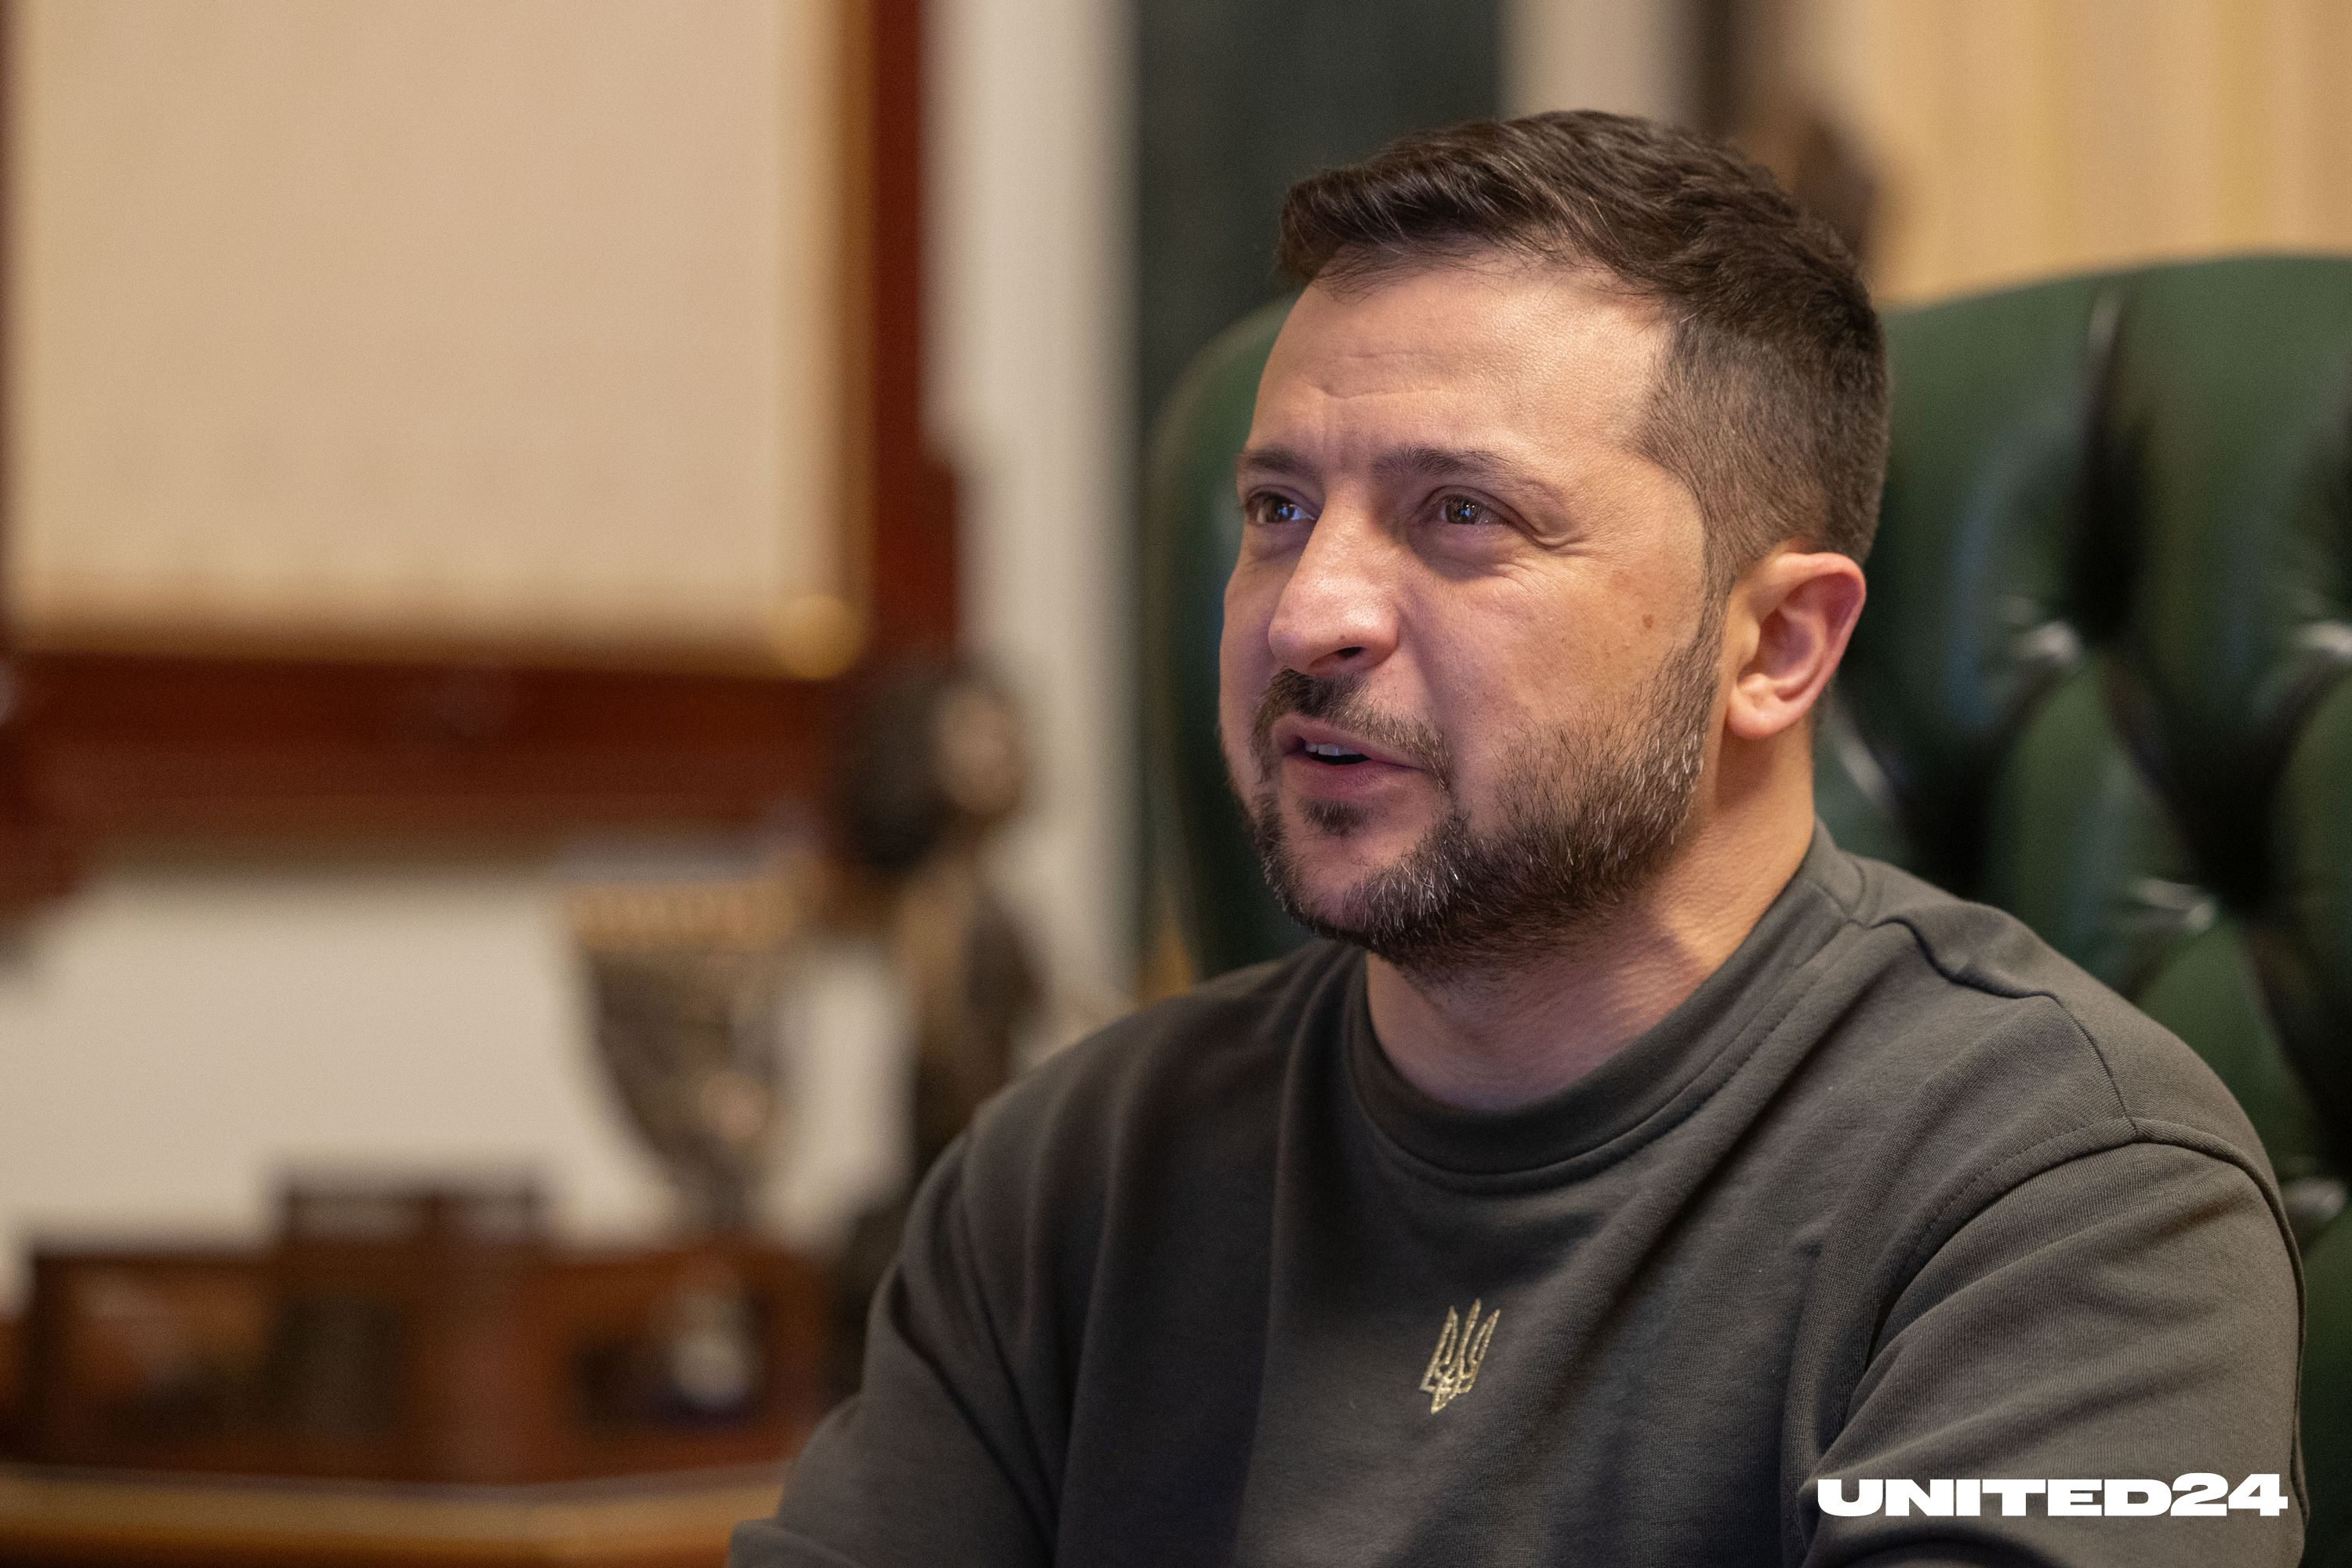 polish man suspected of aiding russian plot to assassinate zelensky arrested